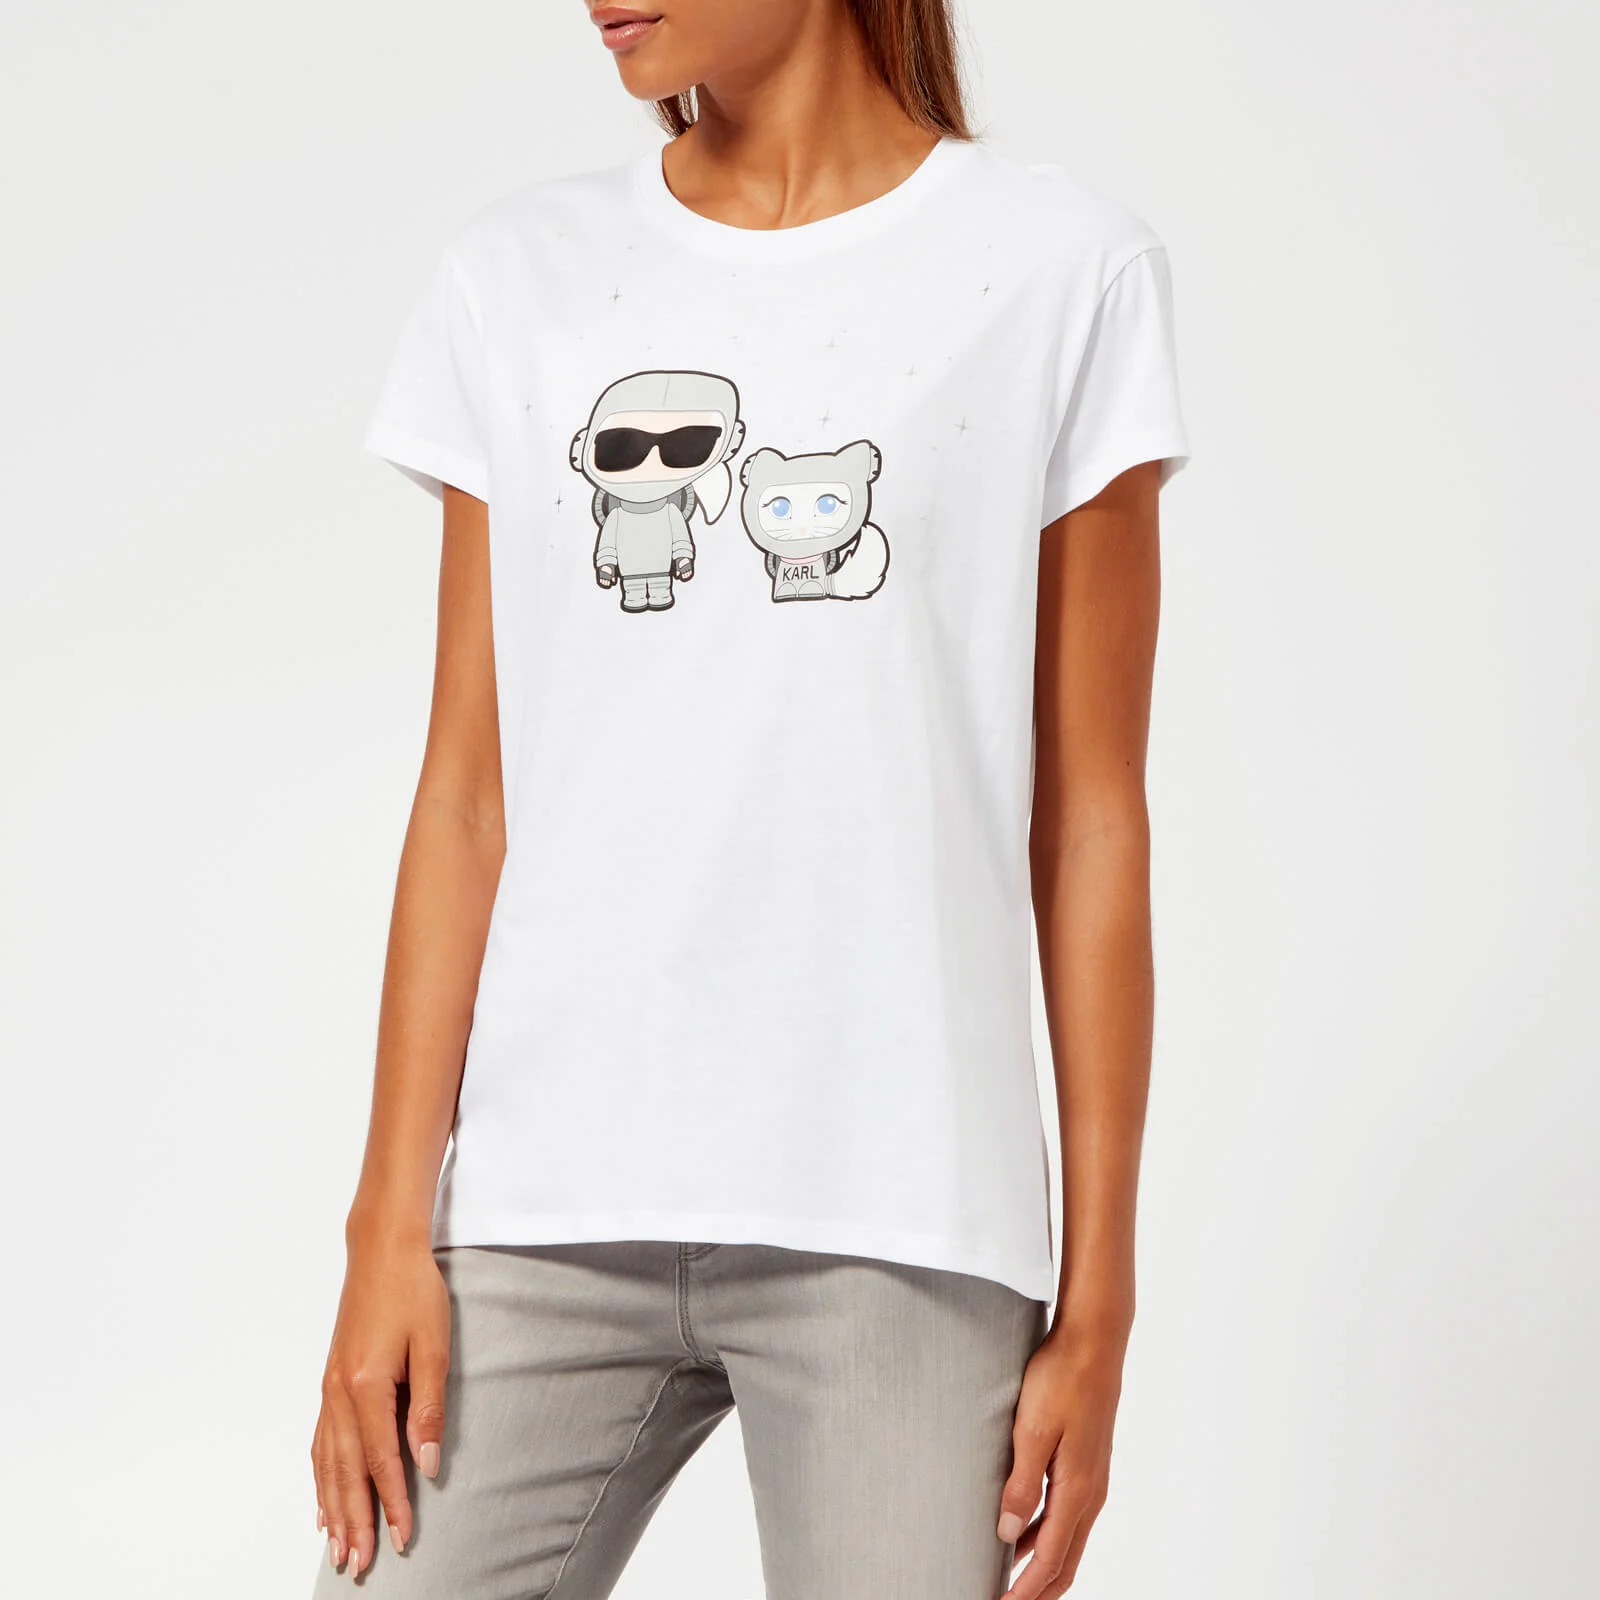 Karl Lagerfeld Women's Space Karl and Choupette T-Shirt - White Image 1